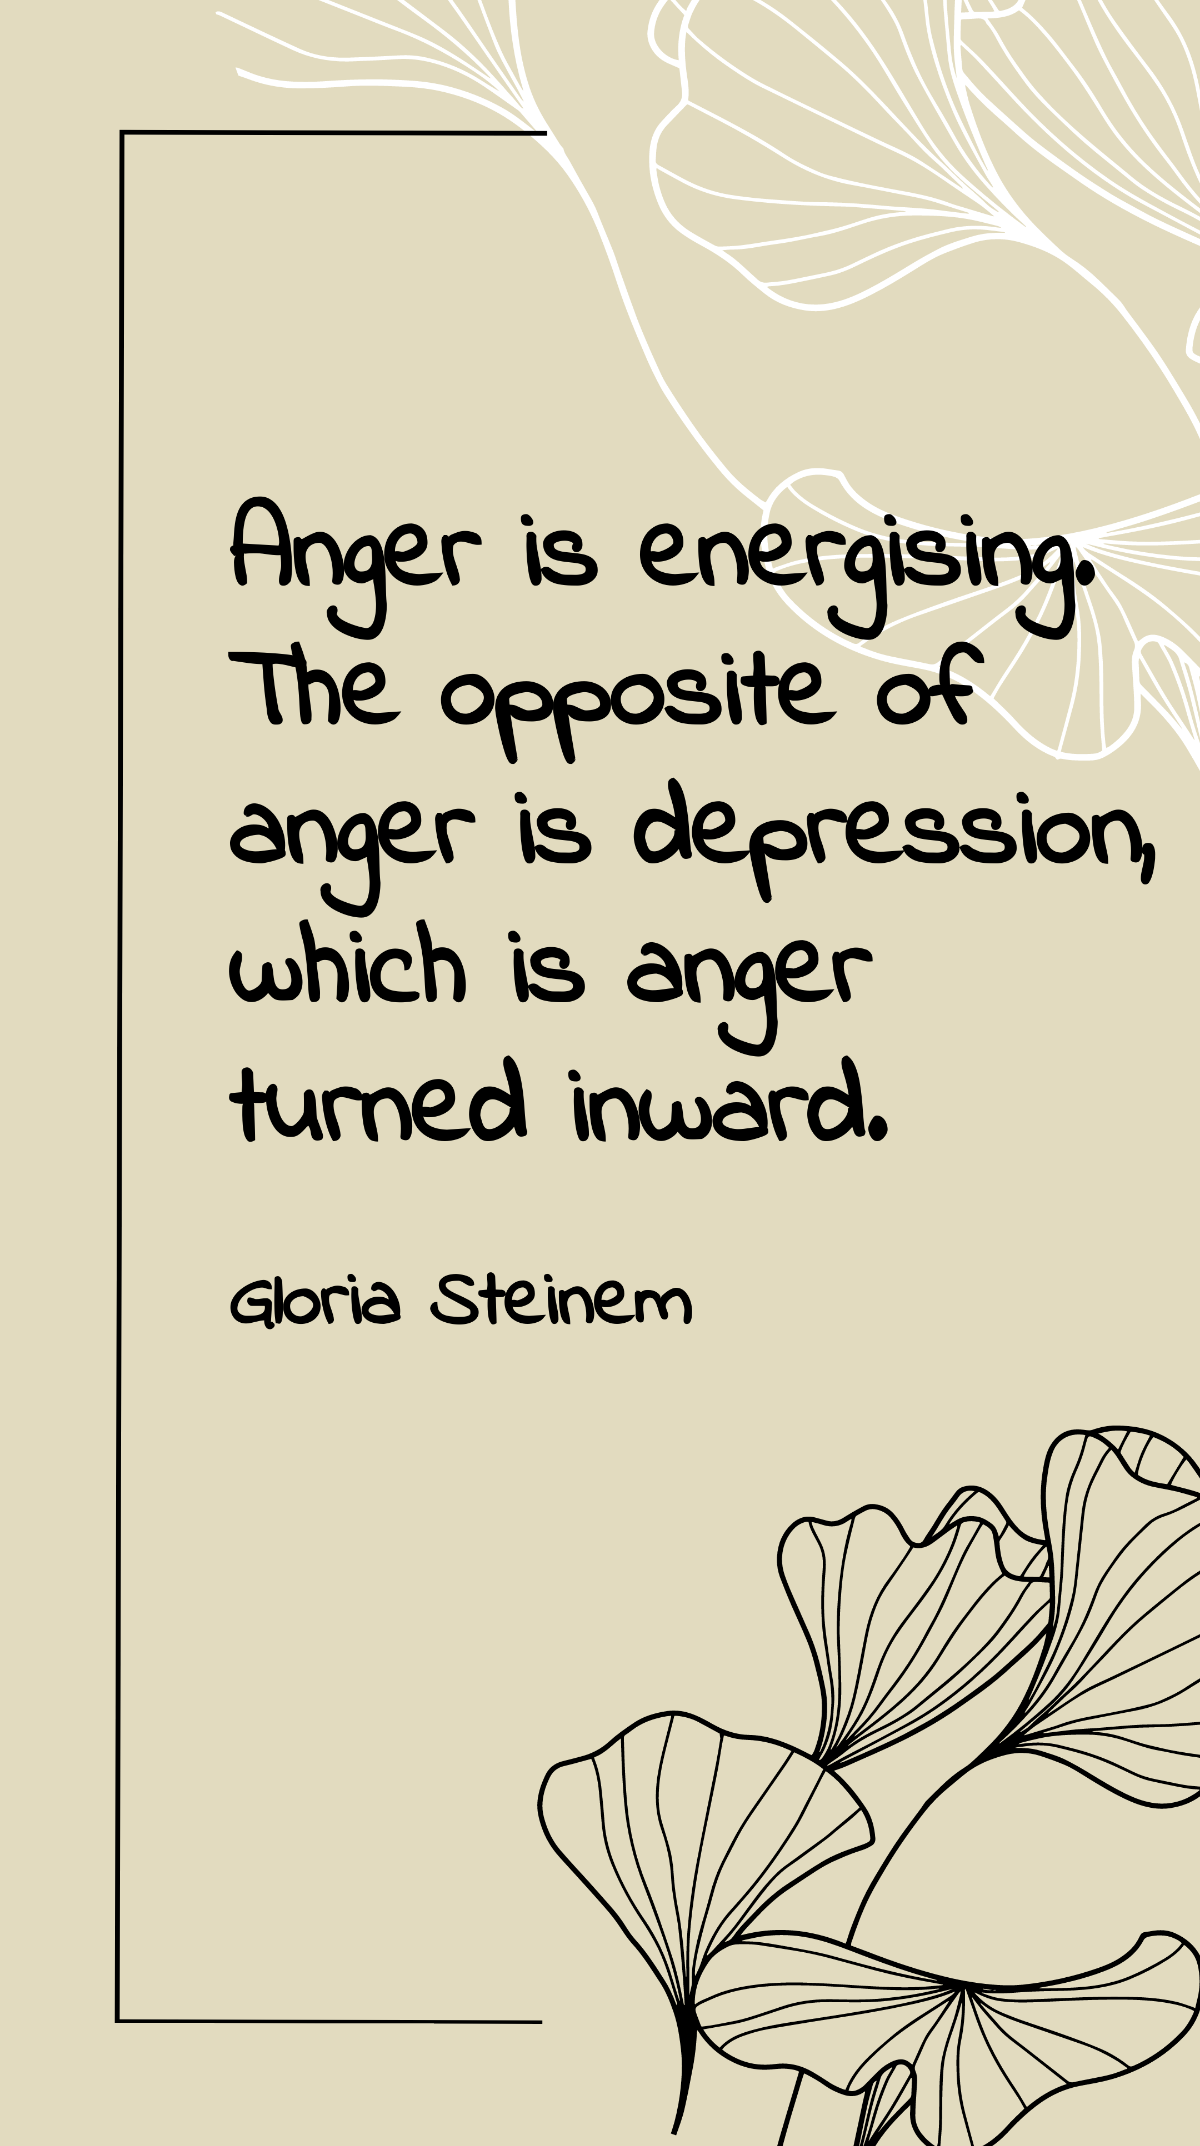 Gloria Steinem - Anger is energising. The opposite of anger is depression, which is anger turned inward. Template